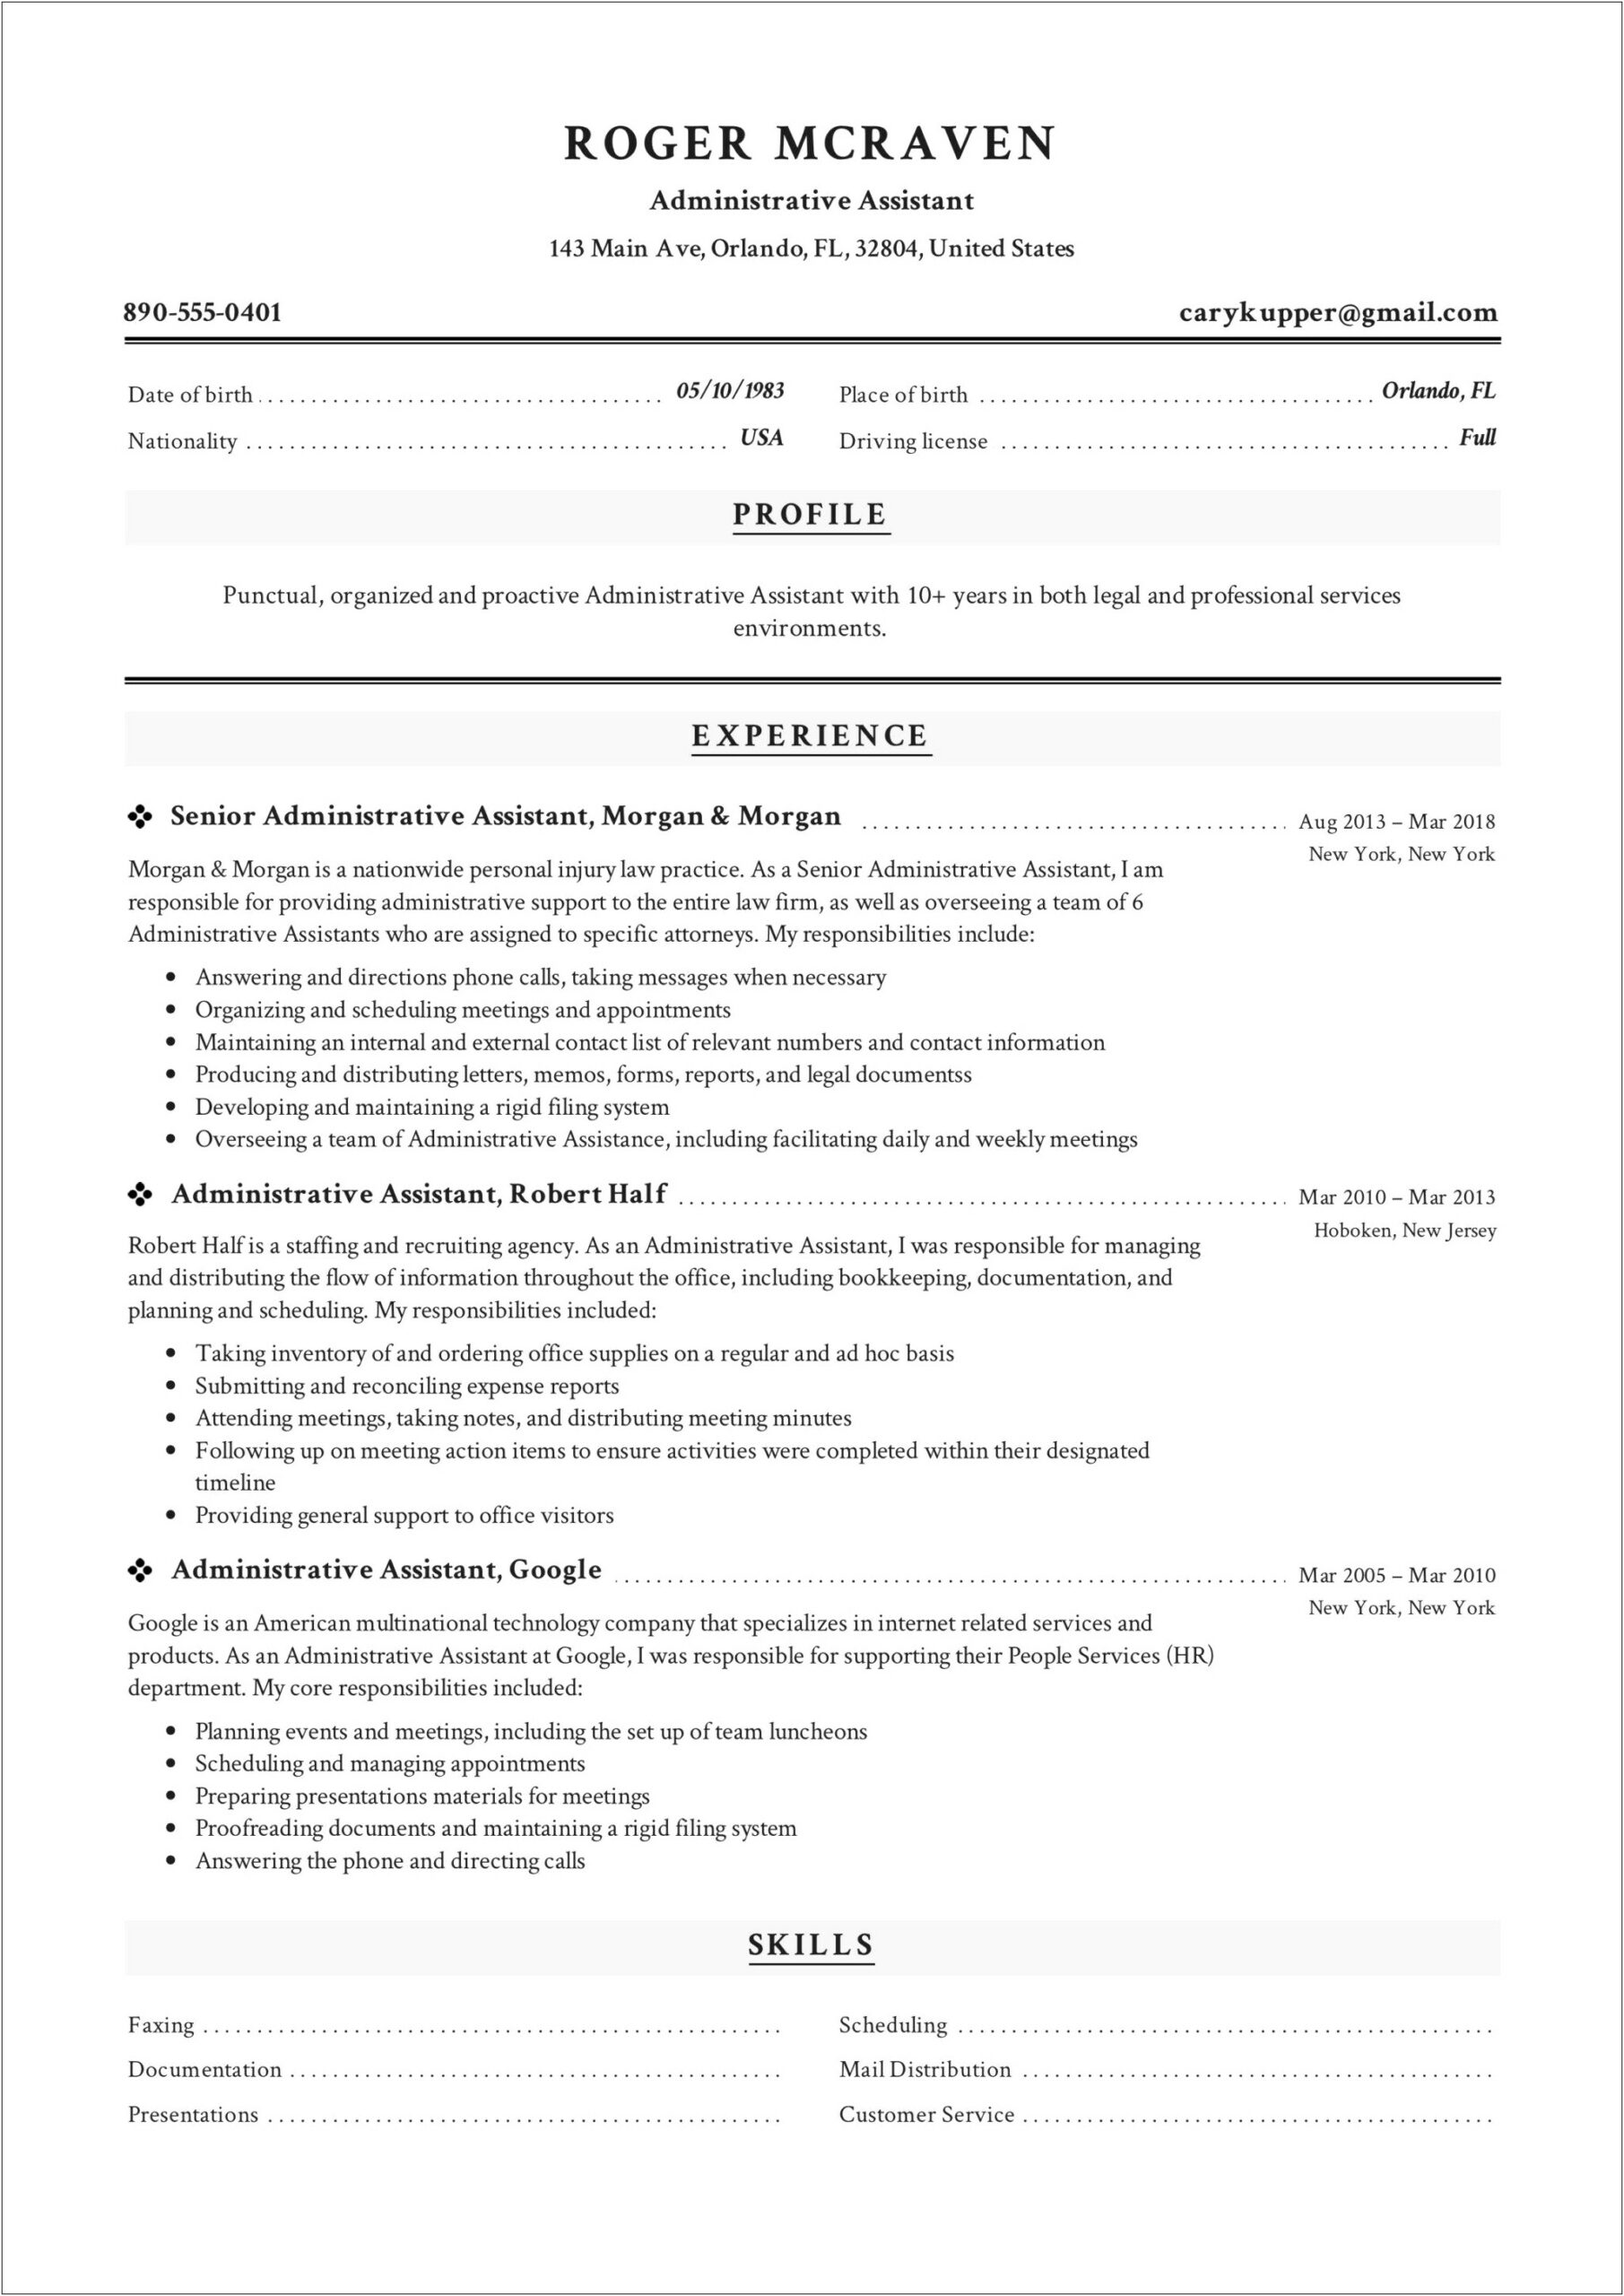 The Best Resume For Administrative Assistant